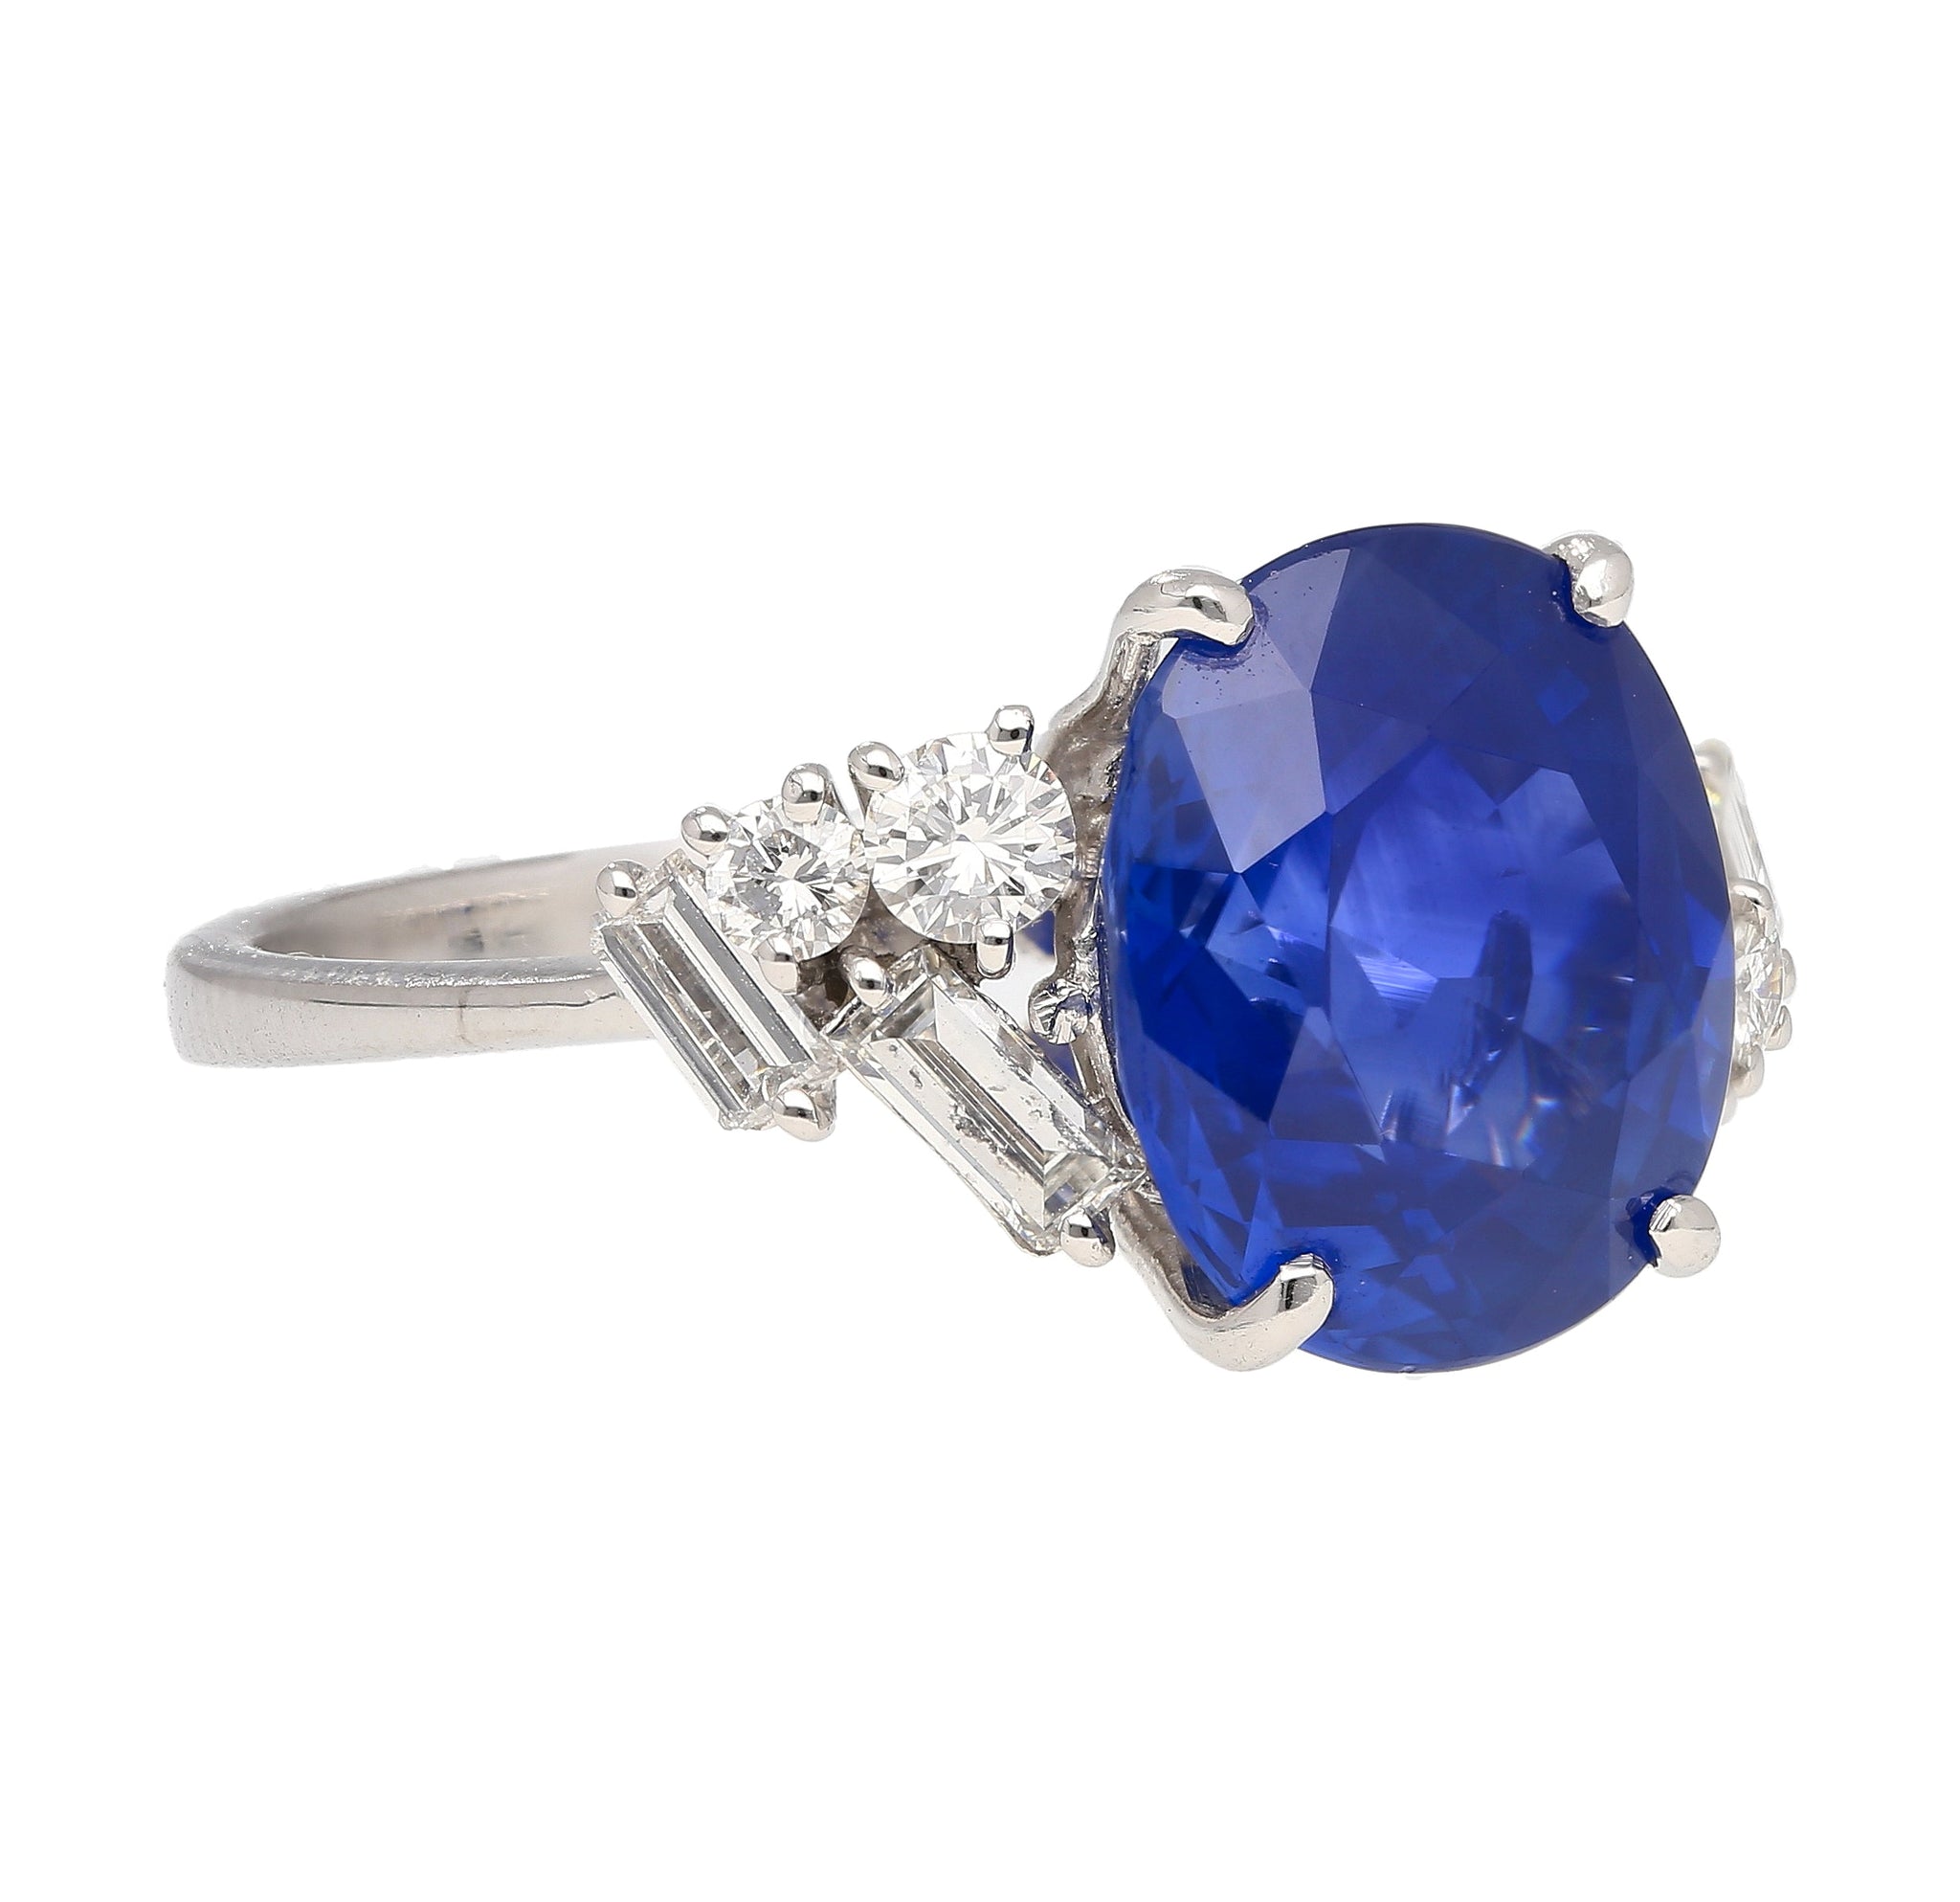 Buy 2 Carats Royal Blue Genuine Lab Grown Sapphire Halo Engagement Ring,  Diana Ring 68 Mm Oval Cut Sapphire,september Birthstone Promise Ring,  Online in India - Etsy